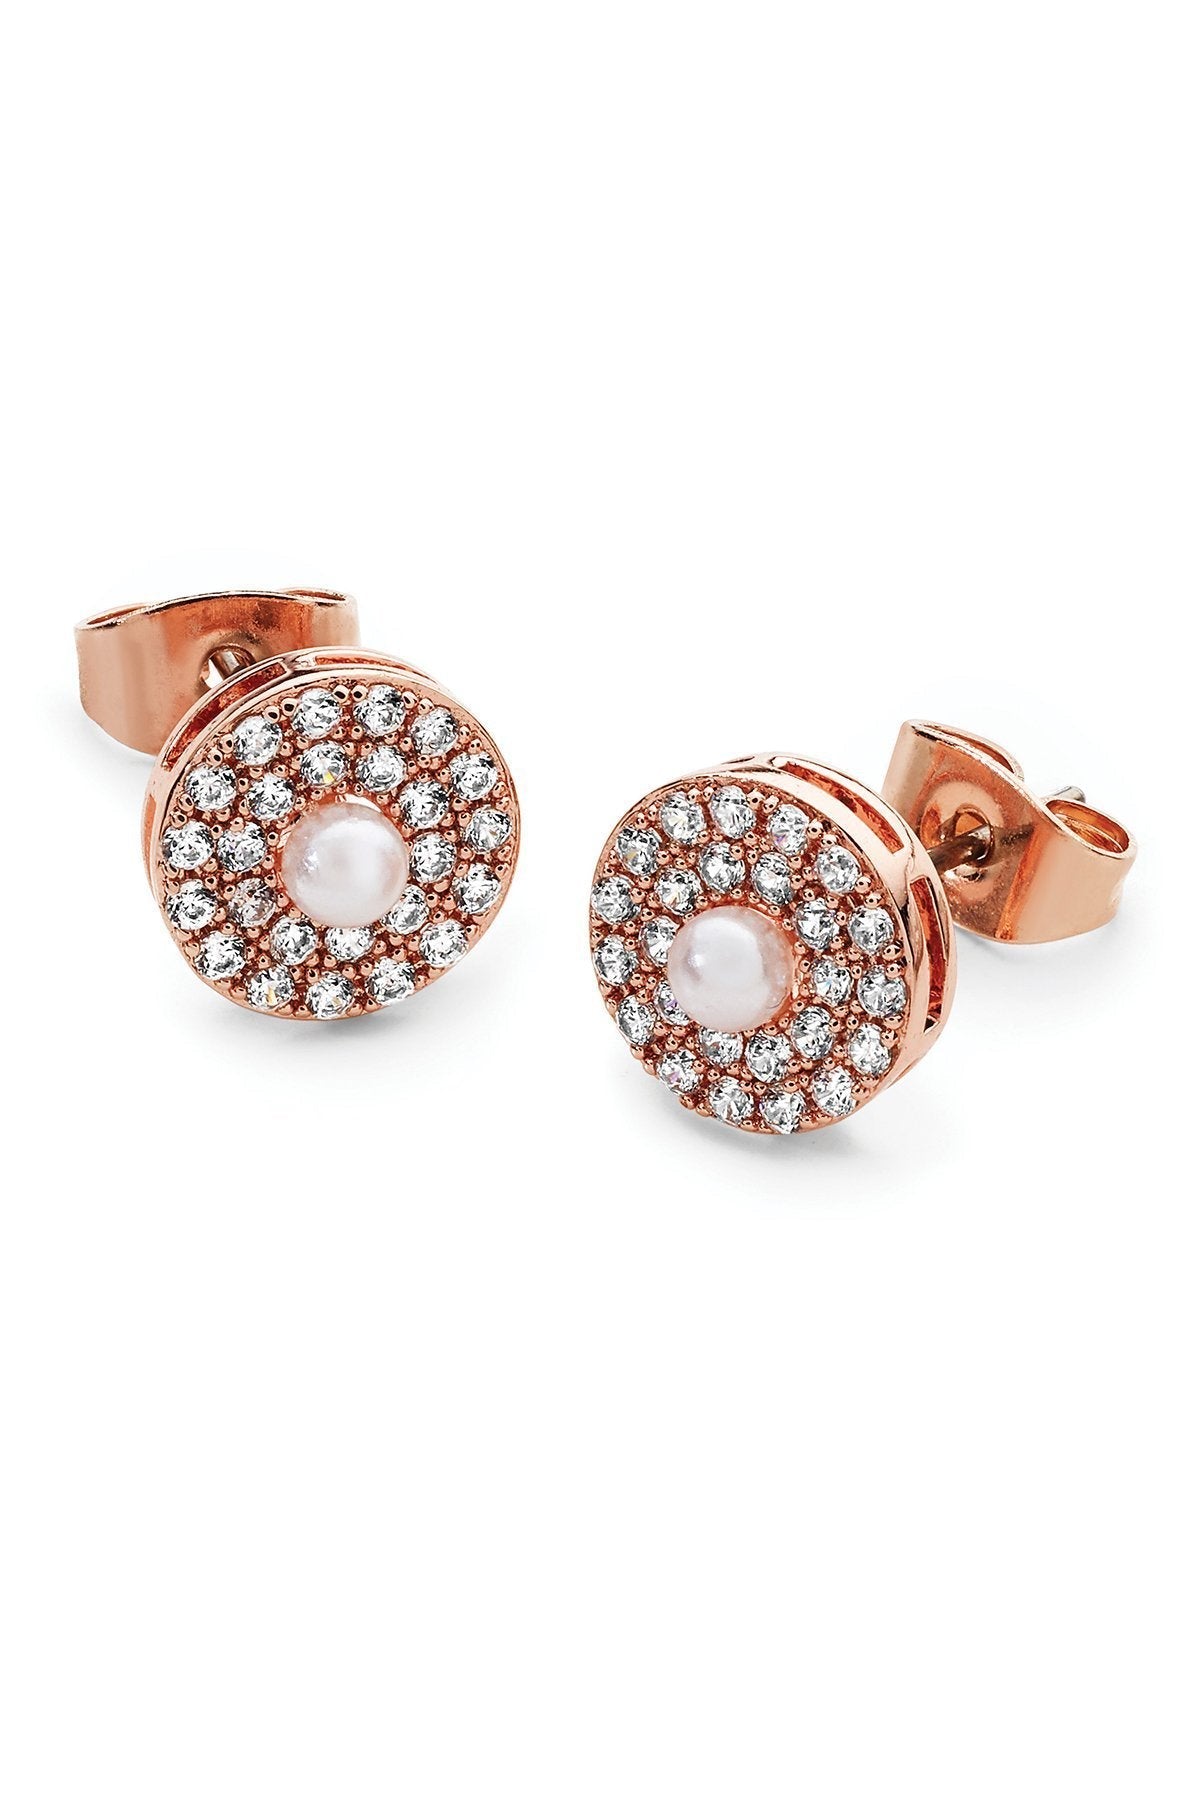 Carraig Donn Pave Circle With Pearl Centre Earrings